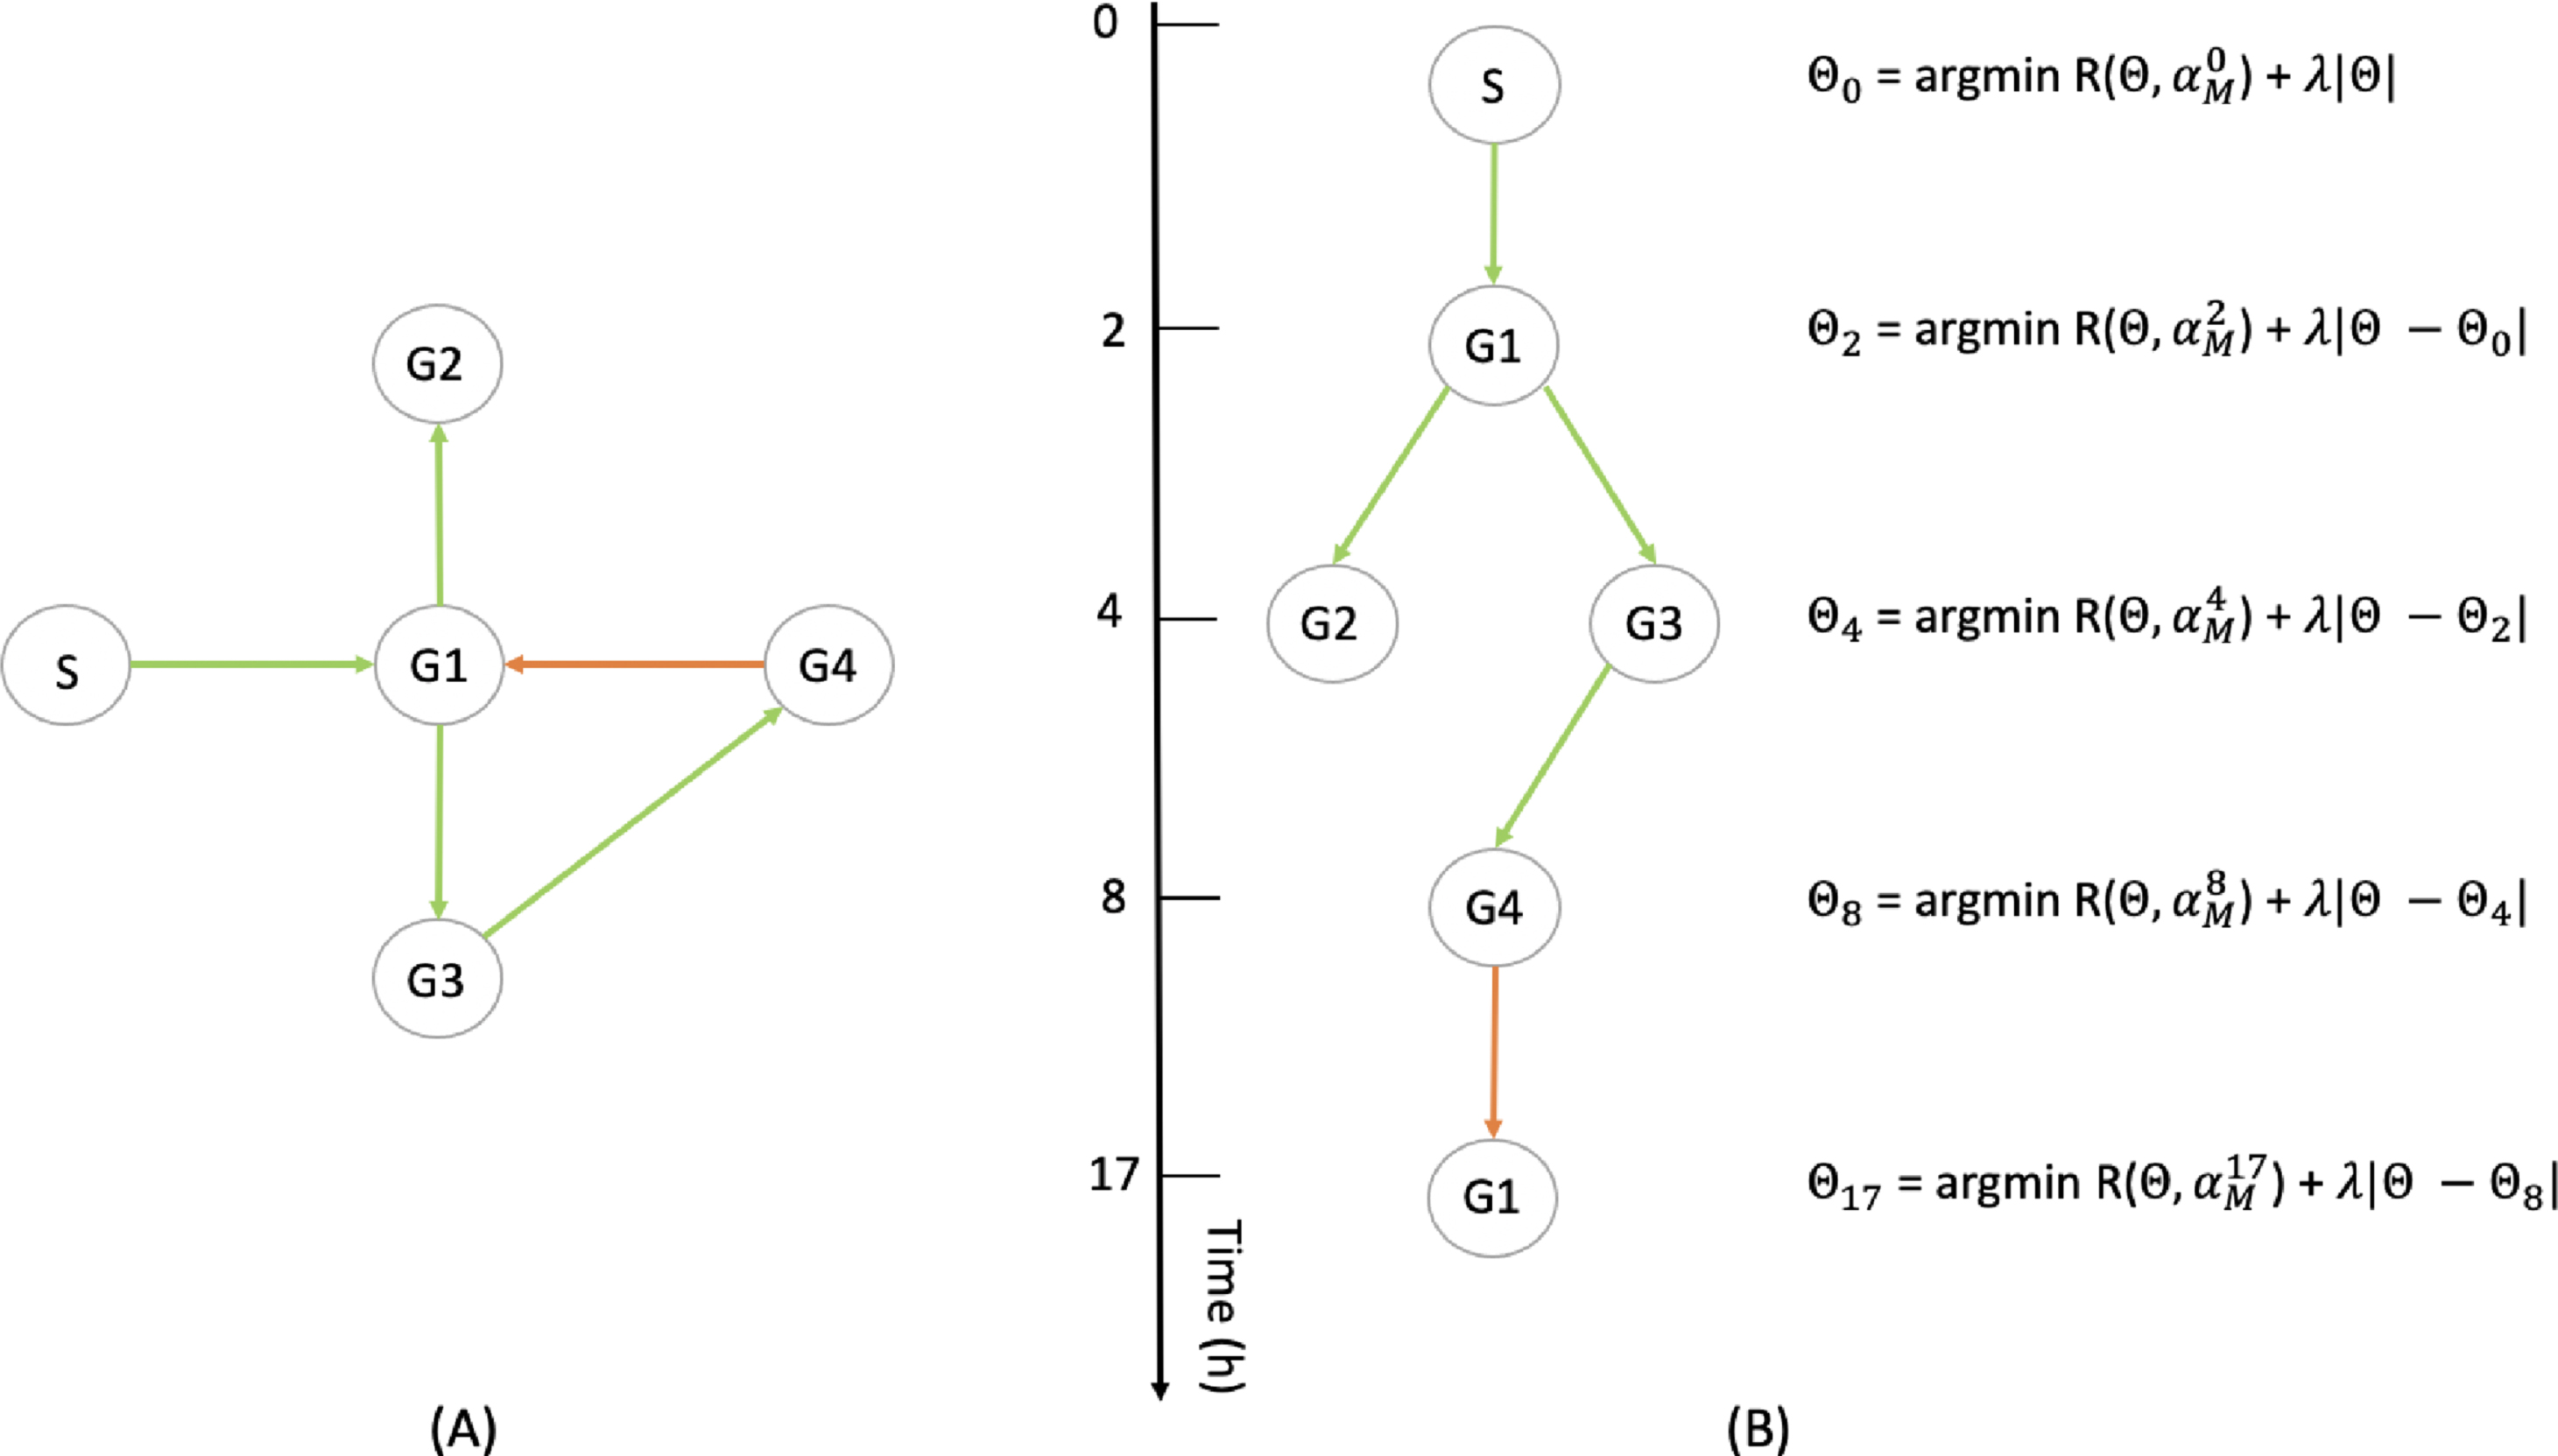 (A) Example of a 4-genes network (G1 to G4) with a stimulus (S) (see Section 6.1). (B) Illustration of the method described in Section 5.2.2: the interactions being observable only at some particular timepoints, they are progressively inferred, each optimization taking into accounts the interactions that are observed on the previous ones.